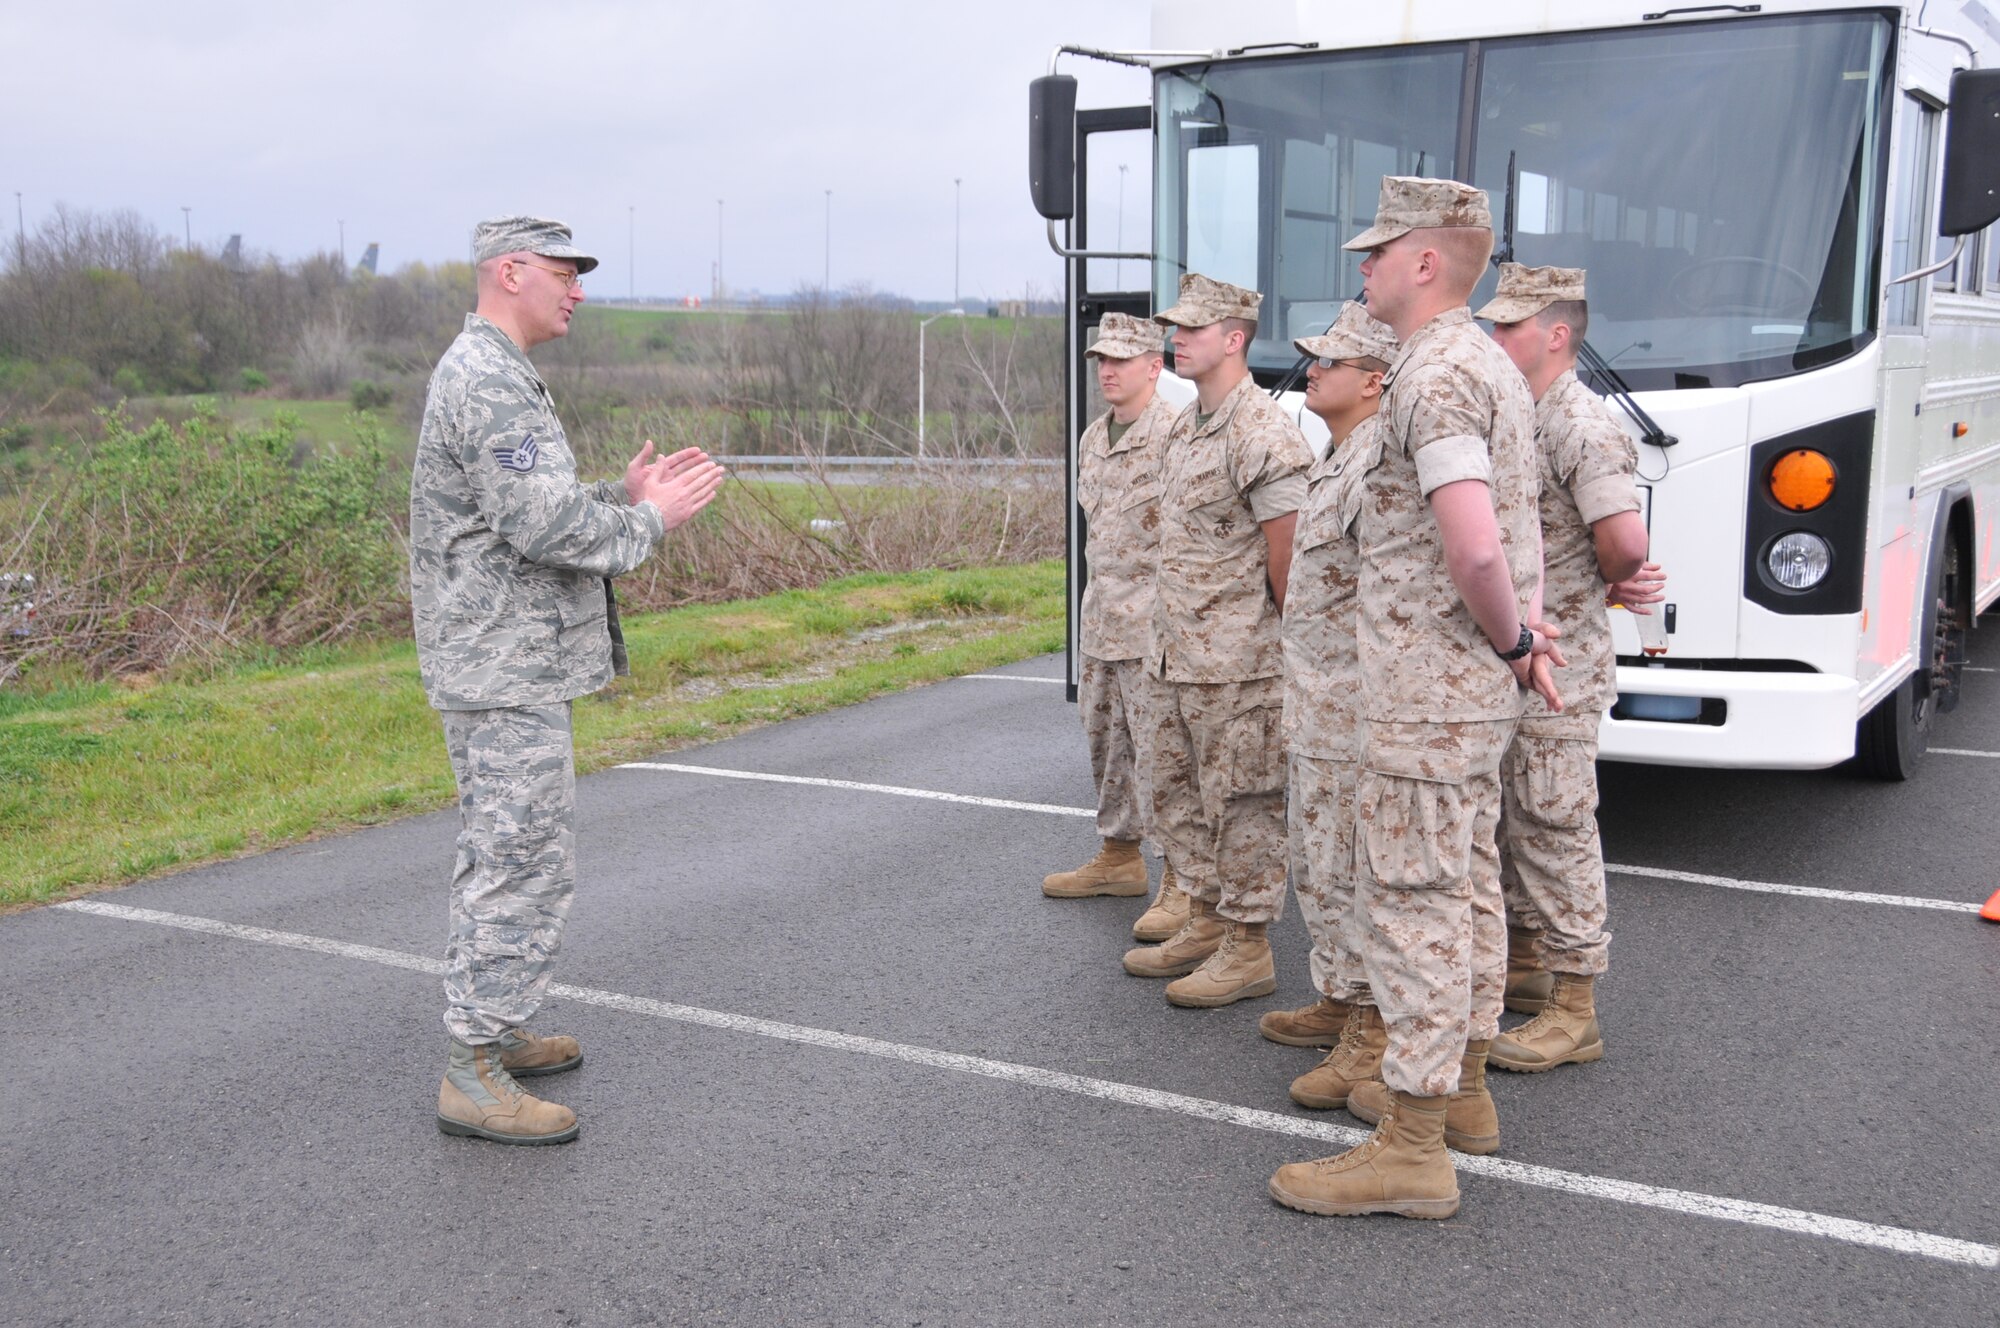 Staff Sgt. Eric Thiem, a trainer with the 171st, and Master Sgt. Robert Souders, a Transport Chief with the 471st, teamed up to train the nine marines to become qualified bus operators. Throughout the week Theim and Souders led classroom lectures, testing, hands on familiarization, safety procedure demonstrations, and operation training of the 28 and 44 passenger bus. (U.S. Air National Guard Photo by Master Sgt. Shawn Monk)